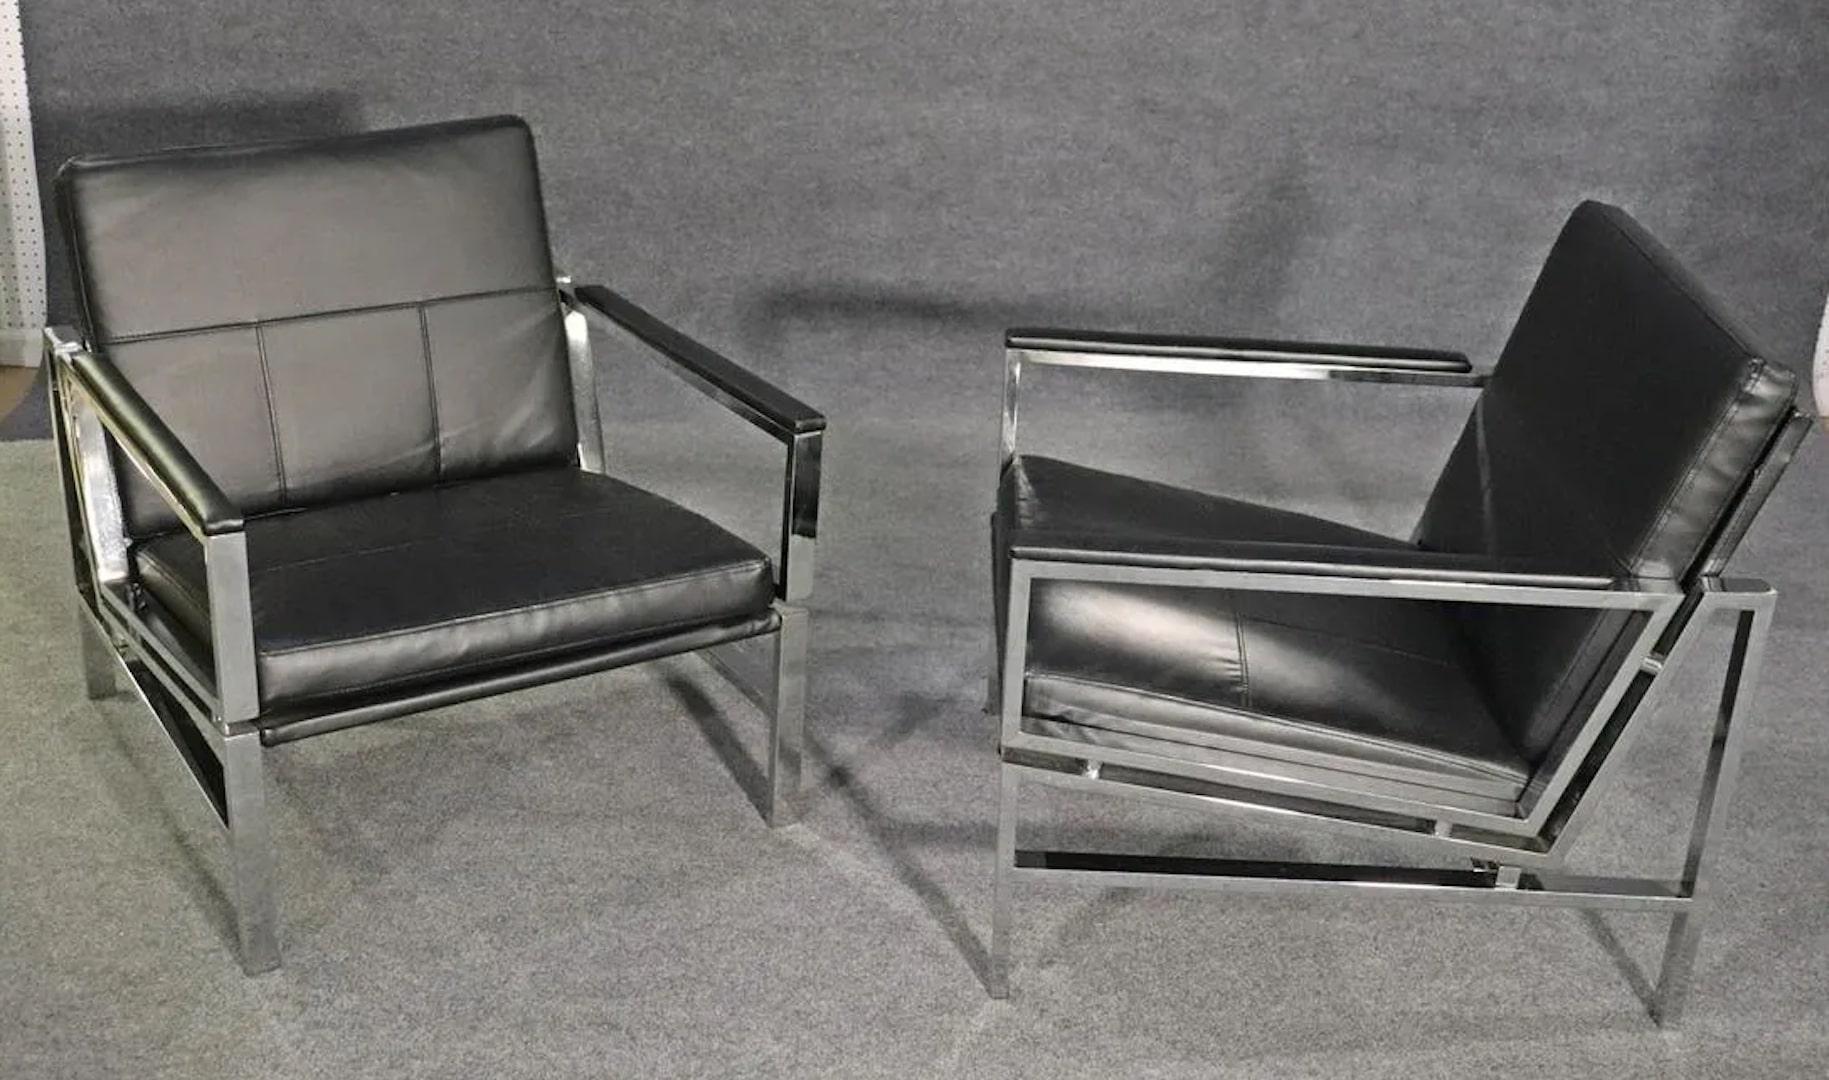 Mid-Century Modern style arm chairs with flat bar chrome frames and leather seats.
Please confirm location.